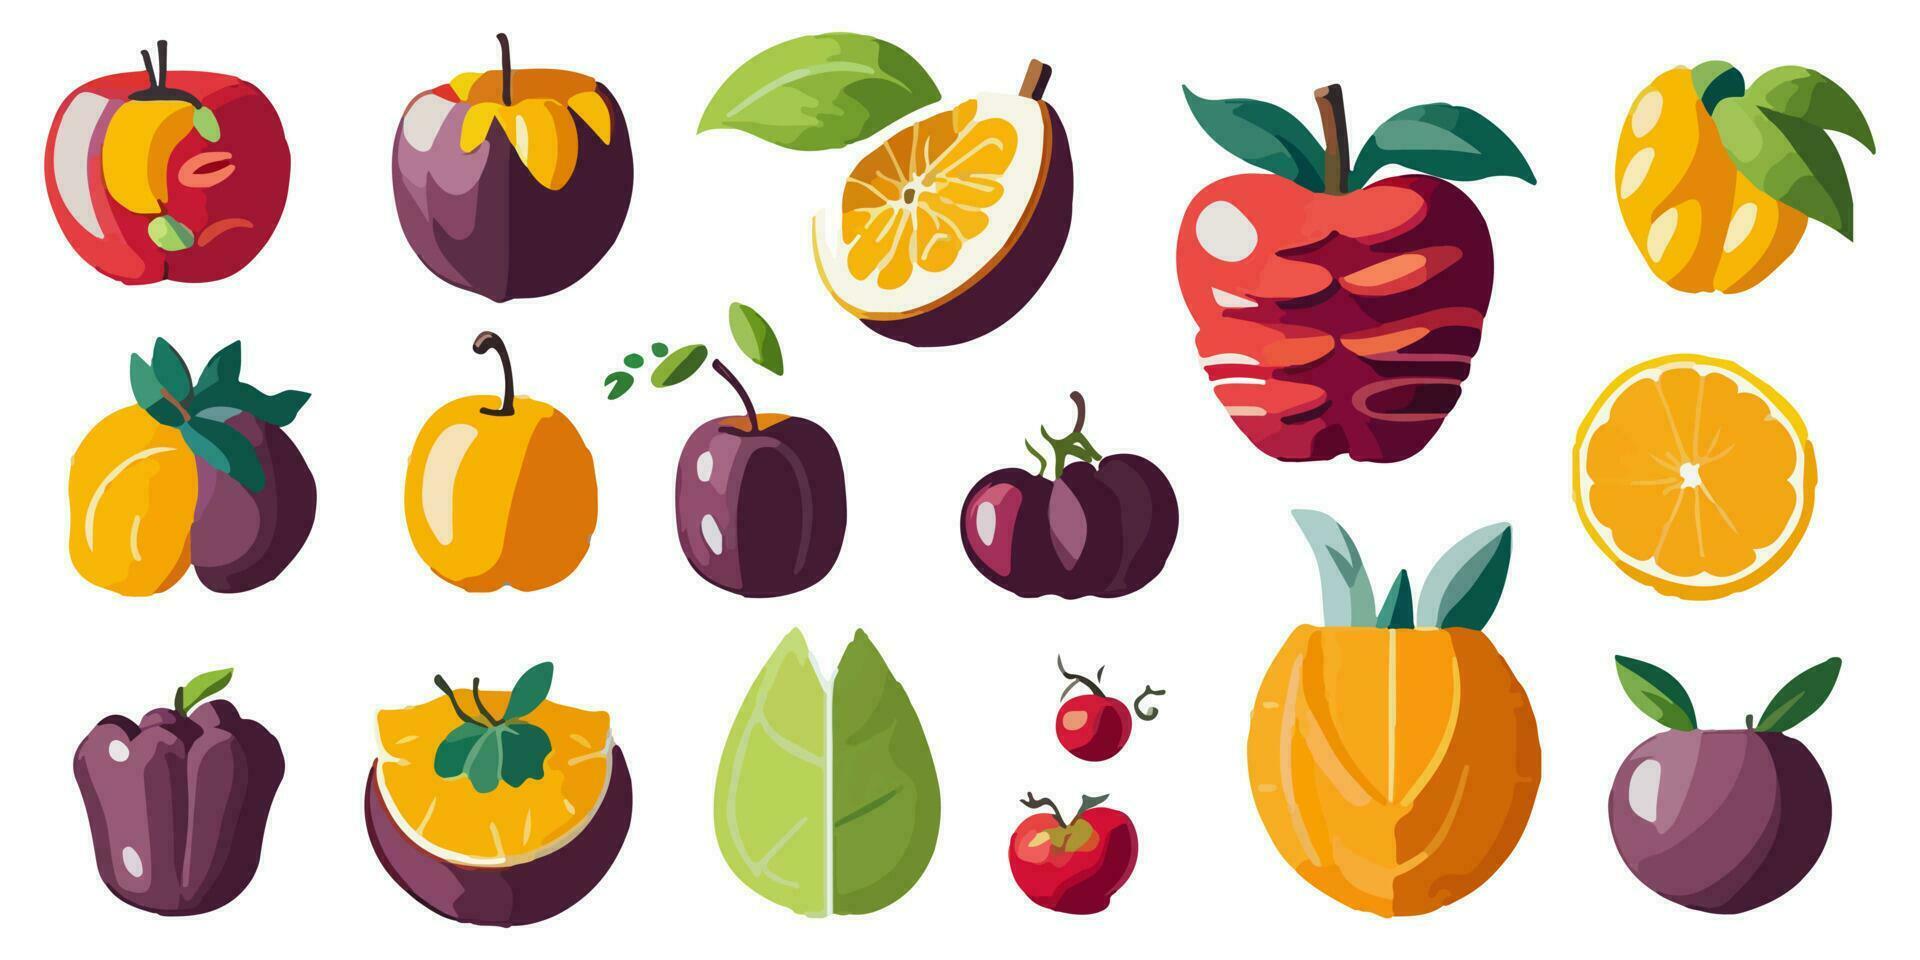 Delicate and Unique Berry Crafted in Elegant Vector Design